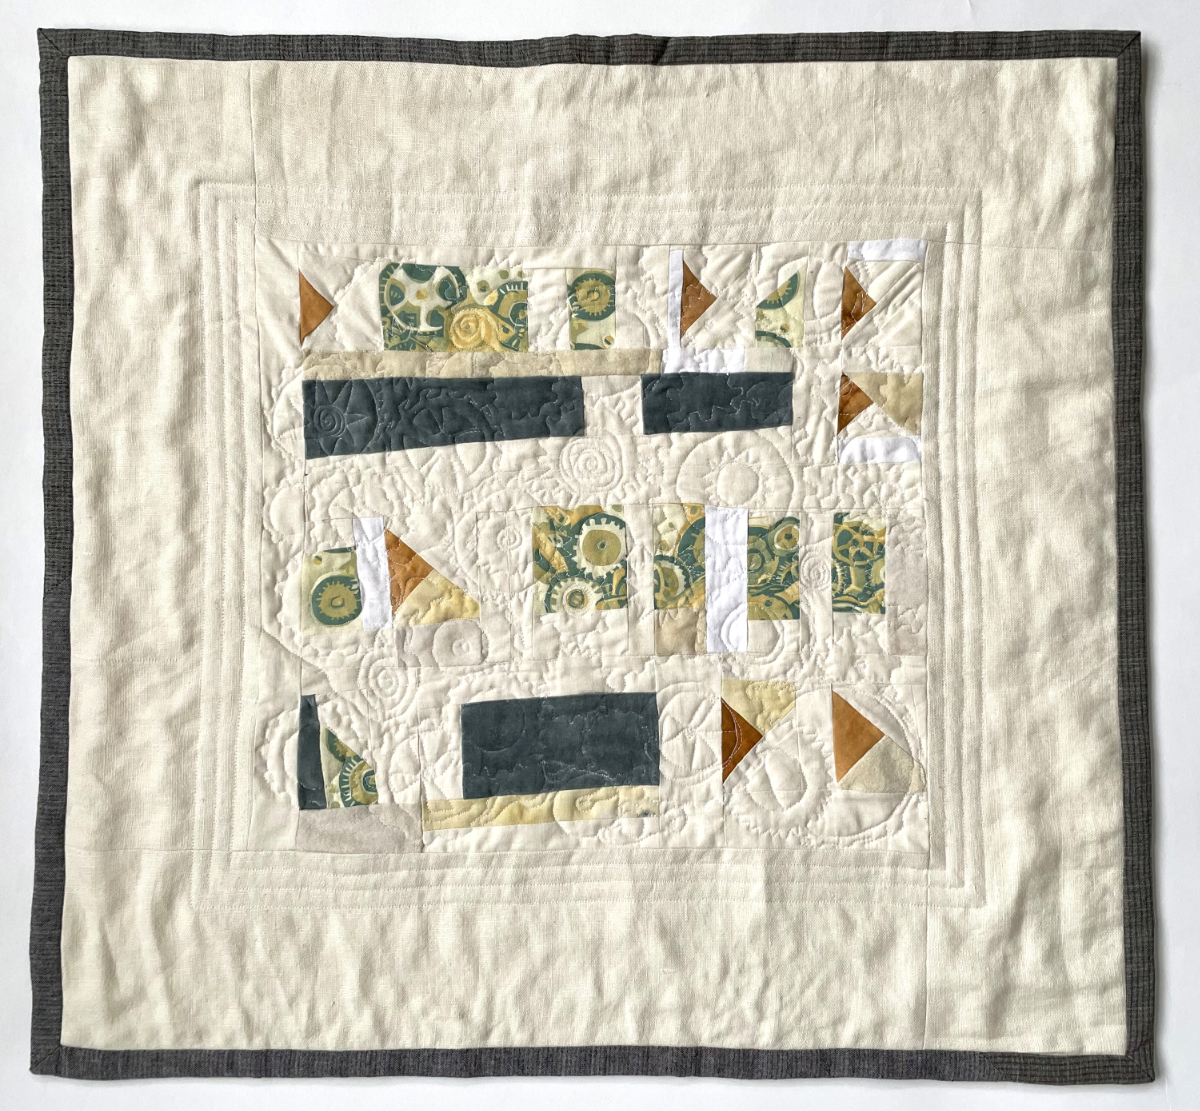 pieced abstract quilt with small shapes including images of gears